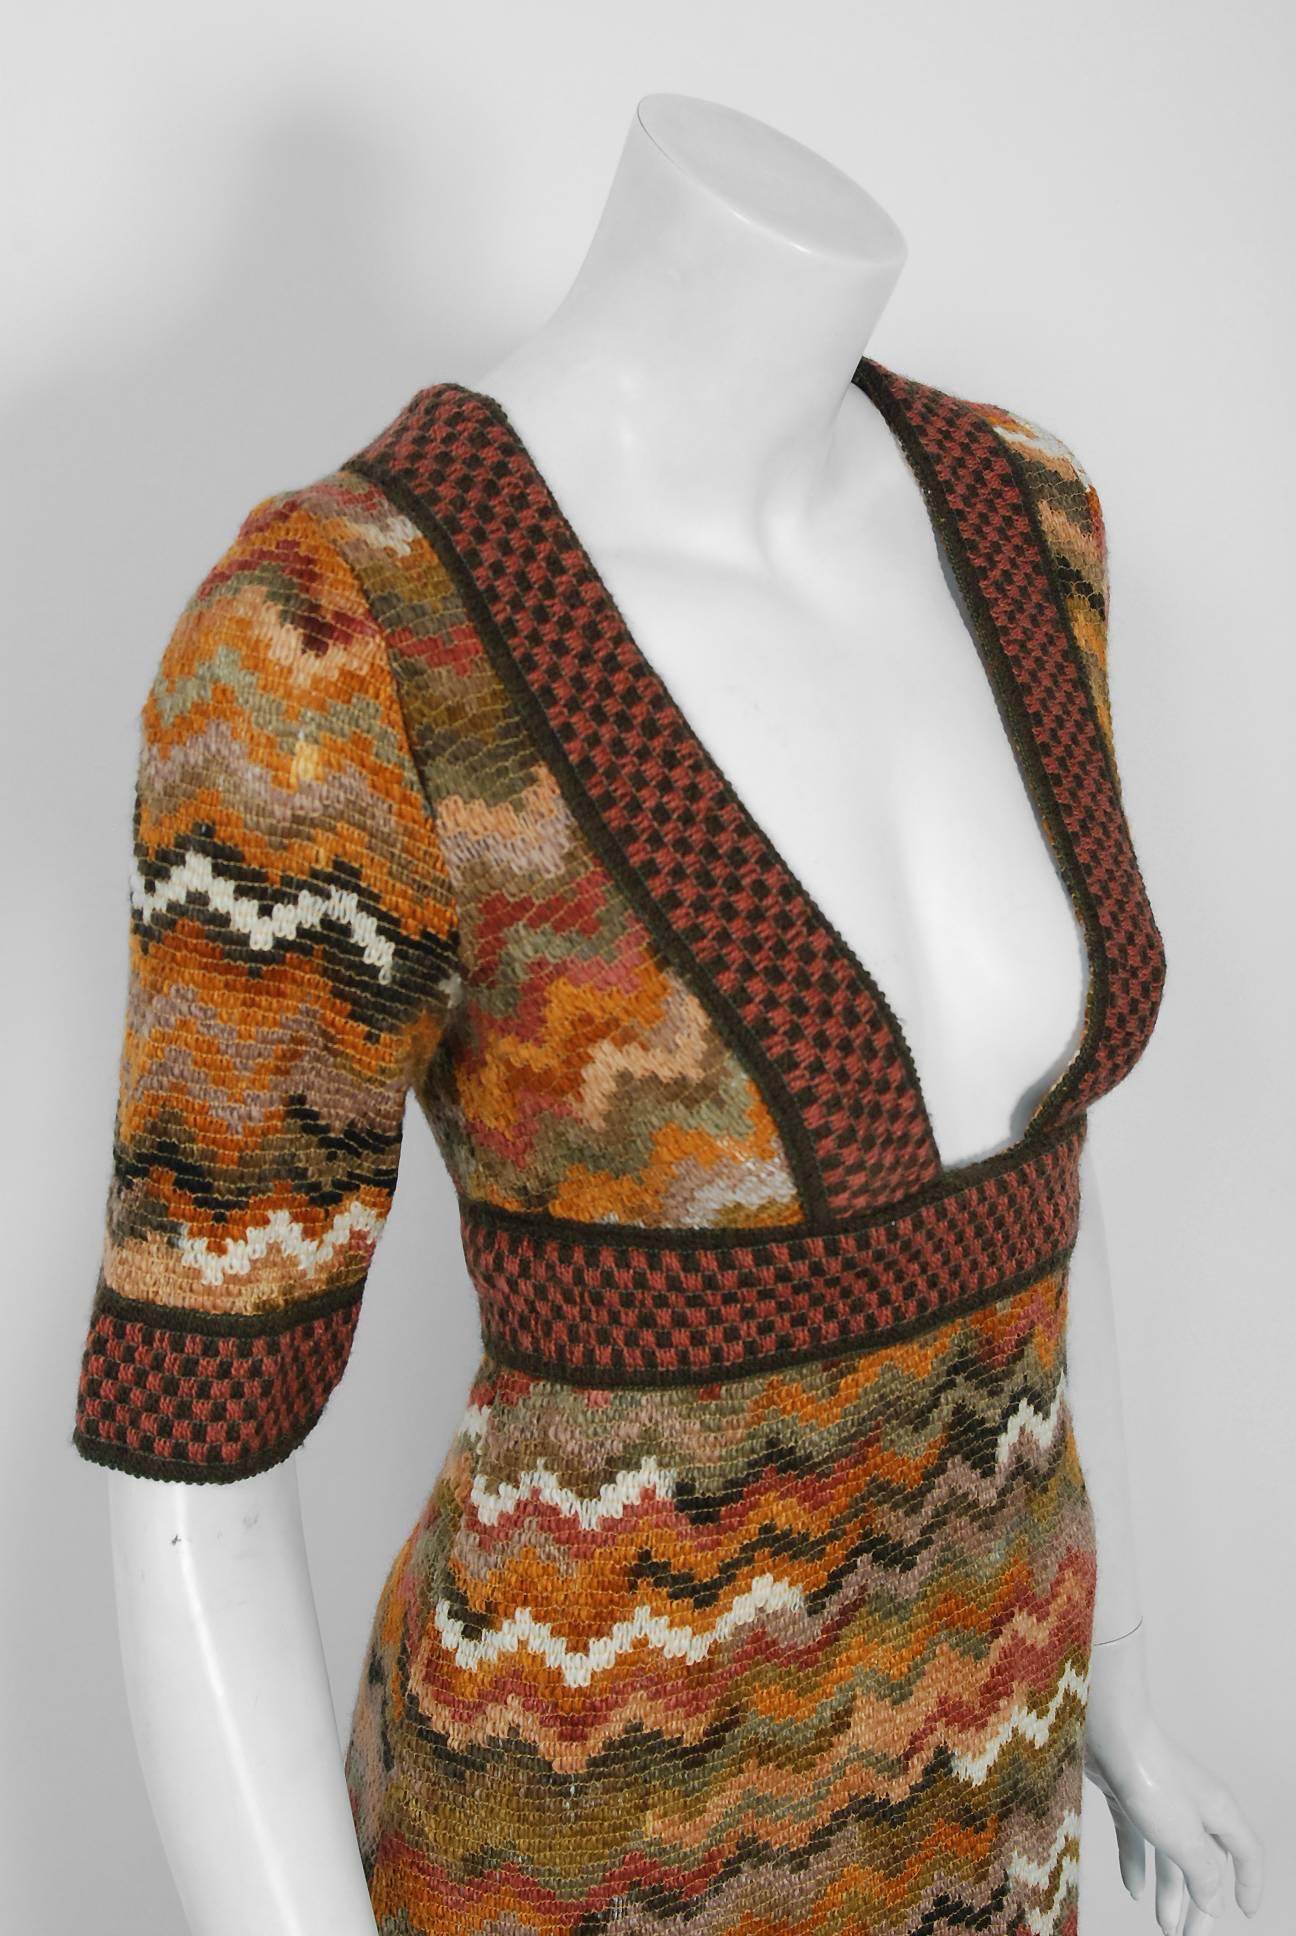 Seductive 1970's colorful ombre wool knit dress by the famous Jean Varon label. John Bates started the Jean Varon label in 1960 and is possibly one of the greatest forgotten talents of this era. With no formal training, he took an apprenticeship at